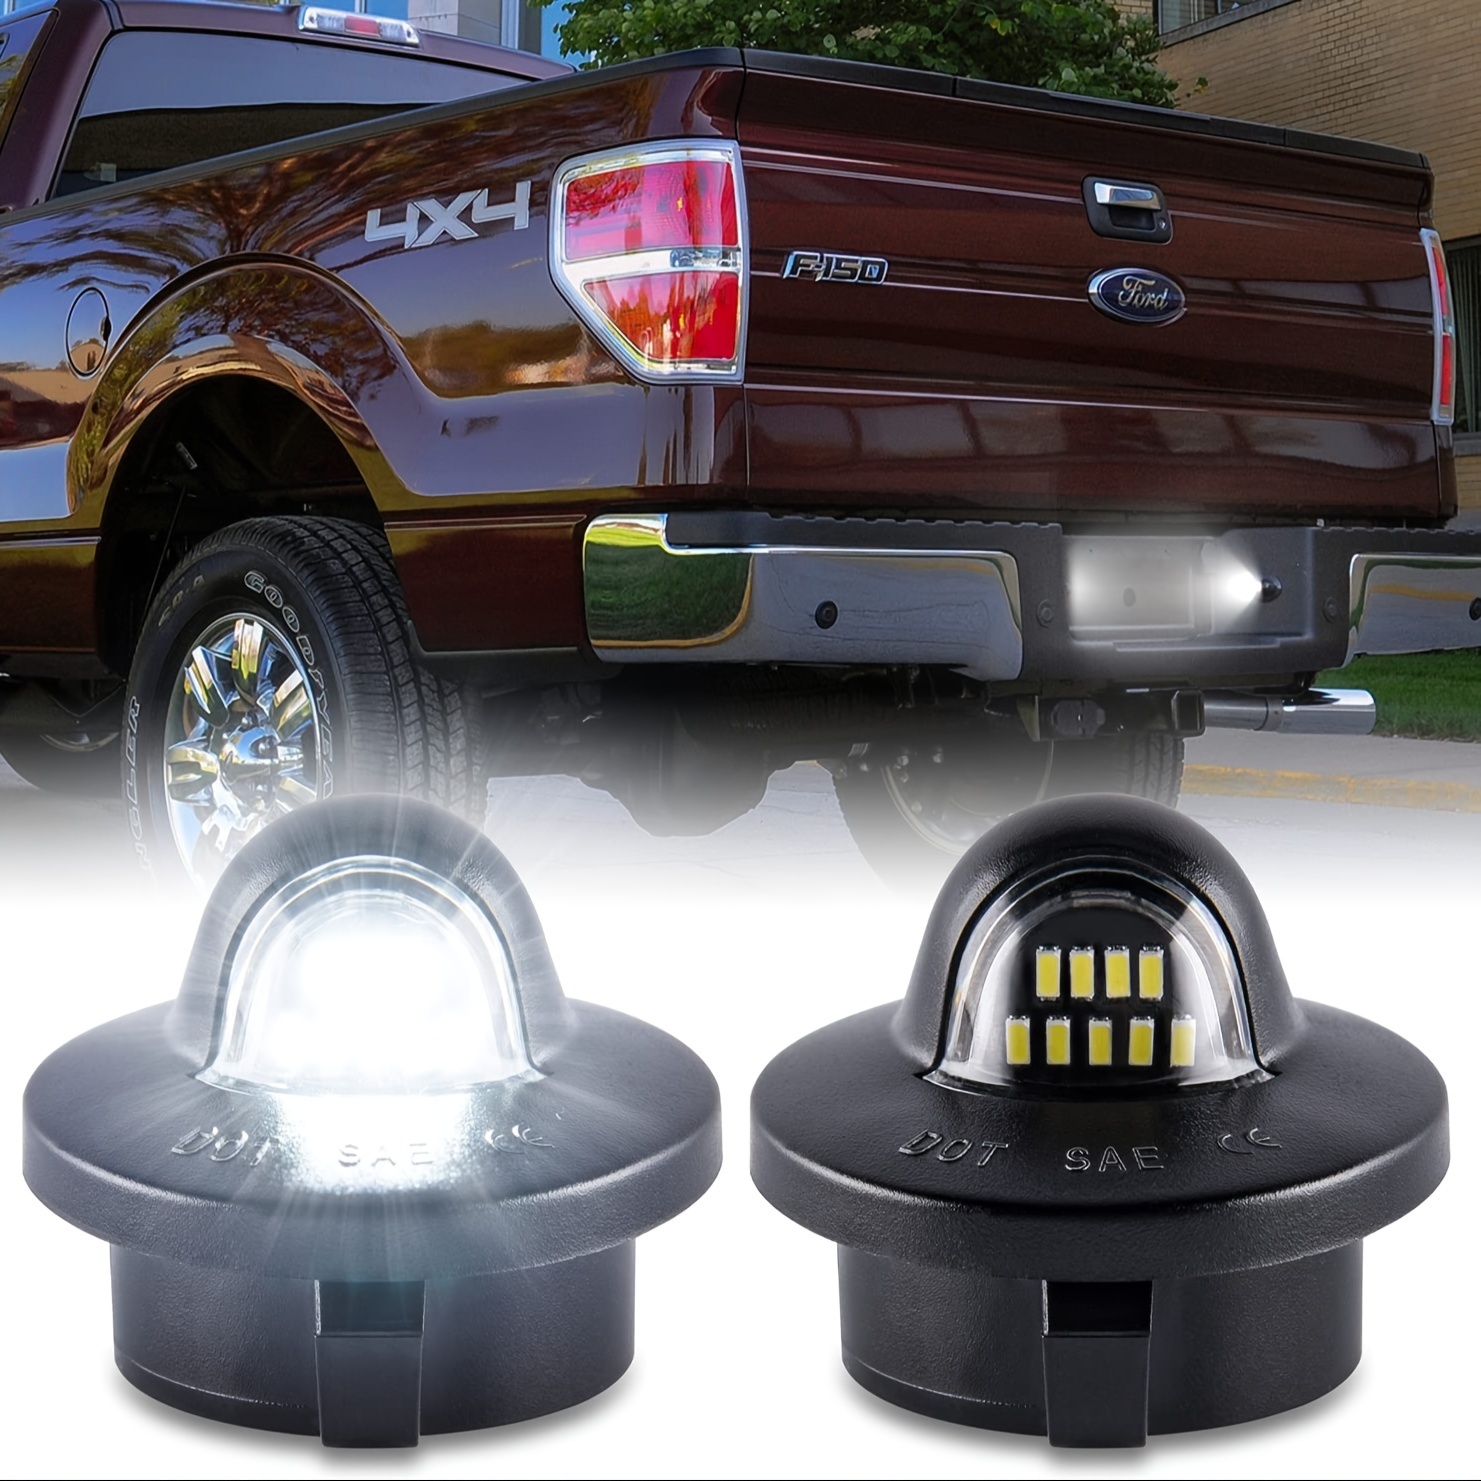 

2x White Smd Led License Plate Tag Light Lamps For Ford F150 F250 F350 1999-2016